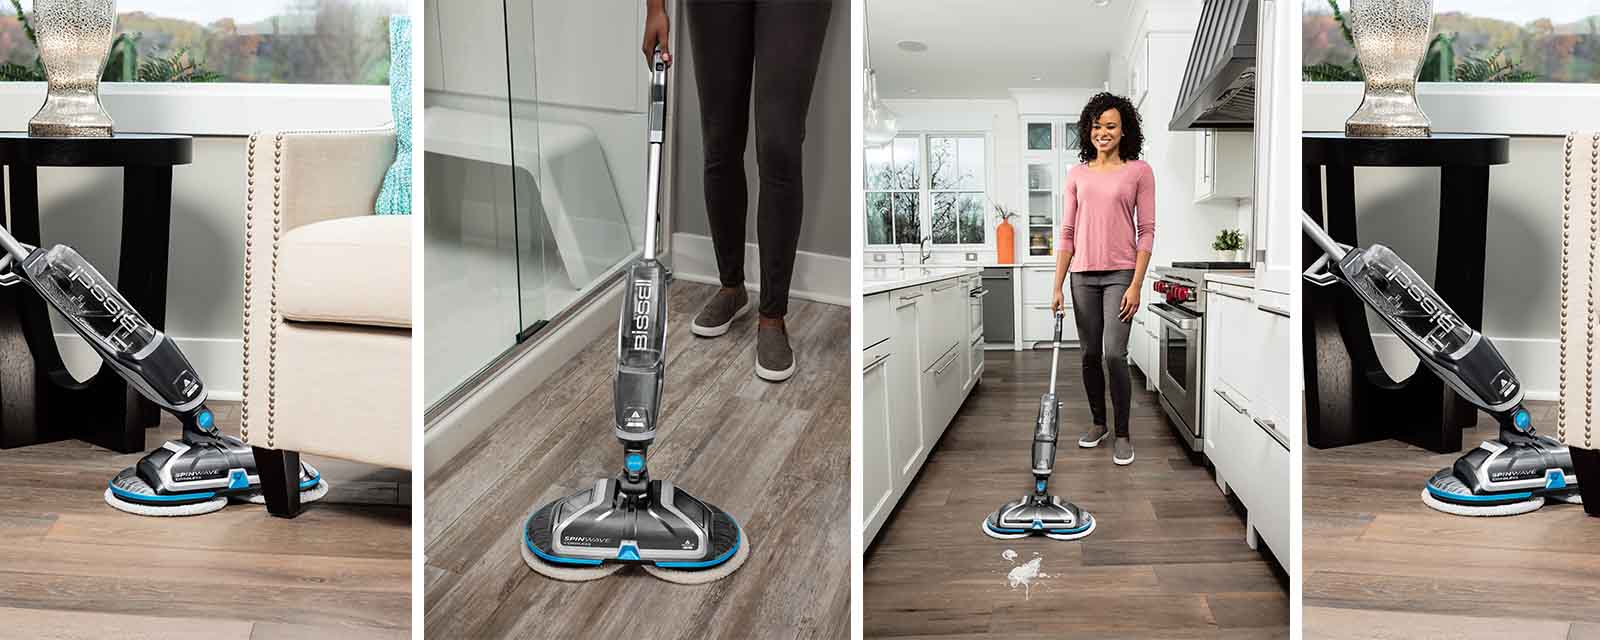 Why I Love the Bissell SpinWave Cordless Mop | Harvey Norman